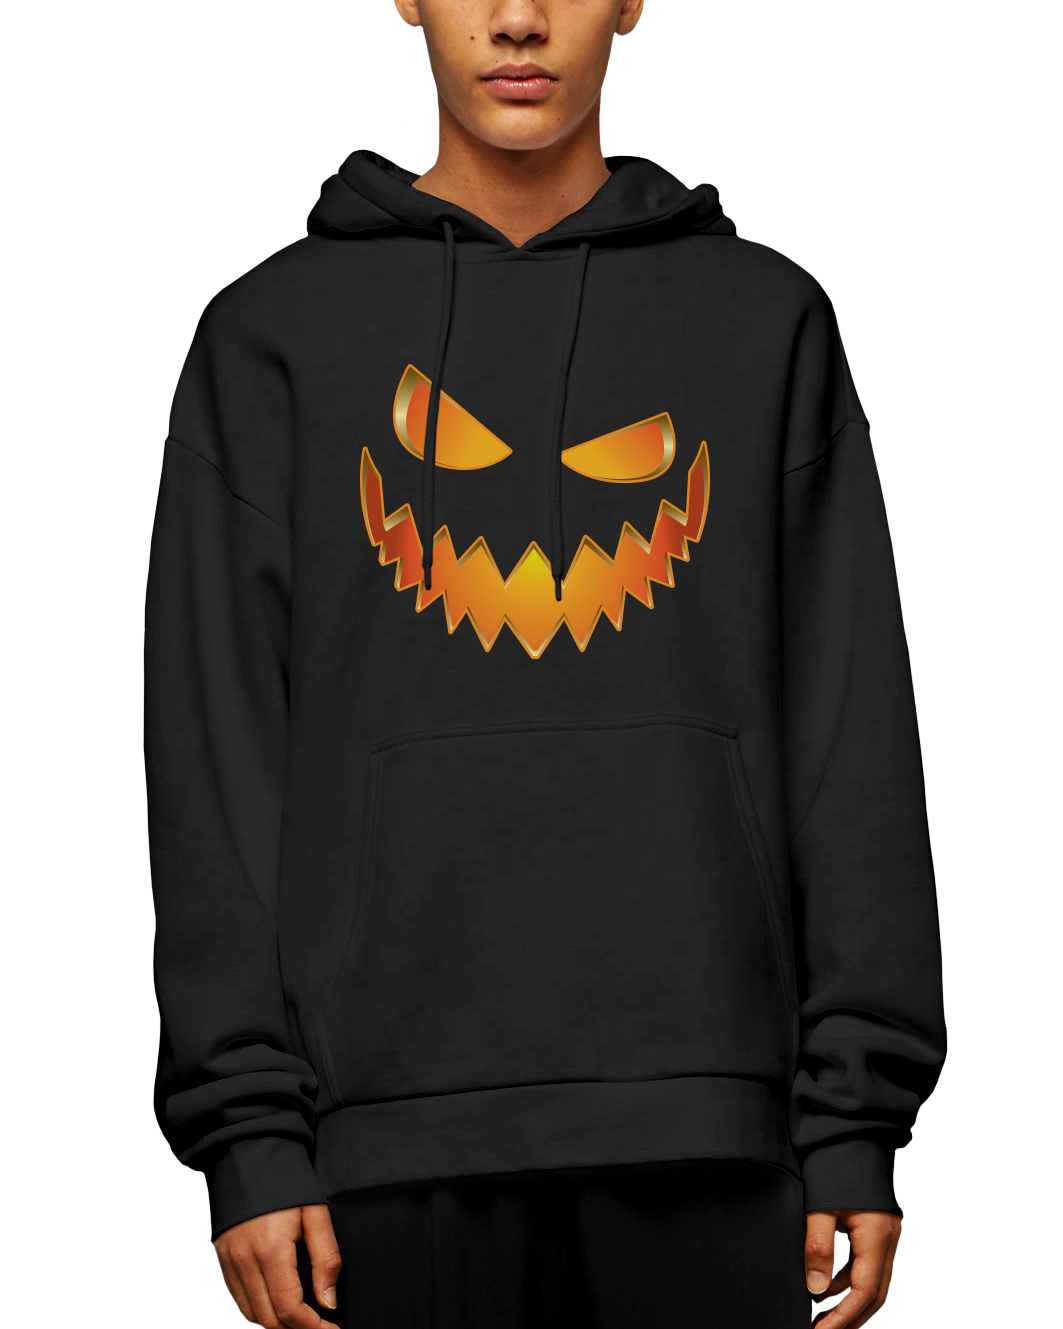 Scary Jack-O-Lantern Adult Pullover Hoodie